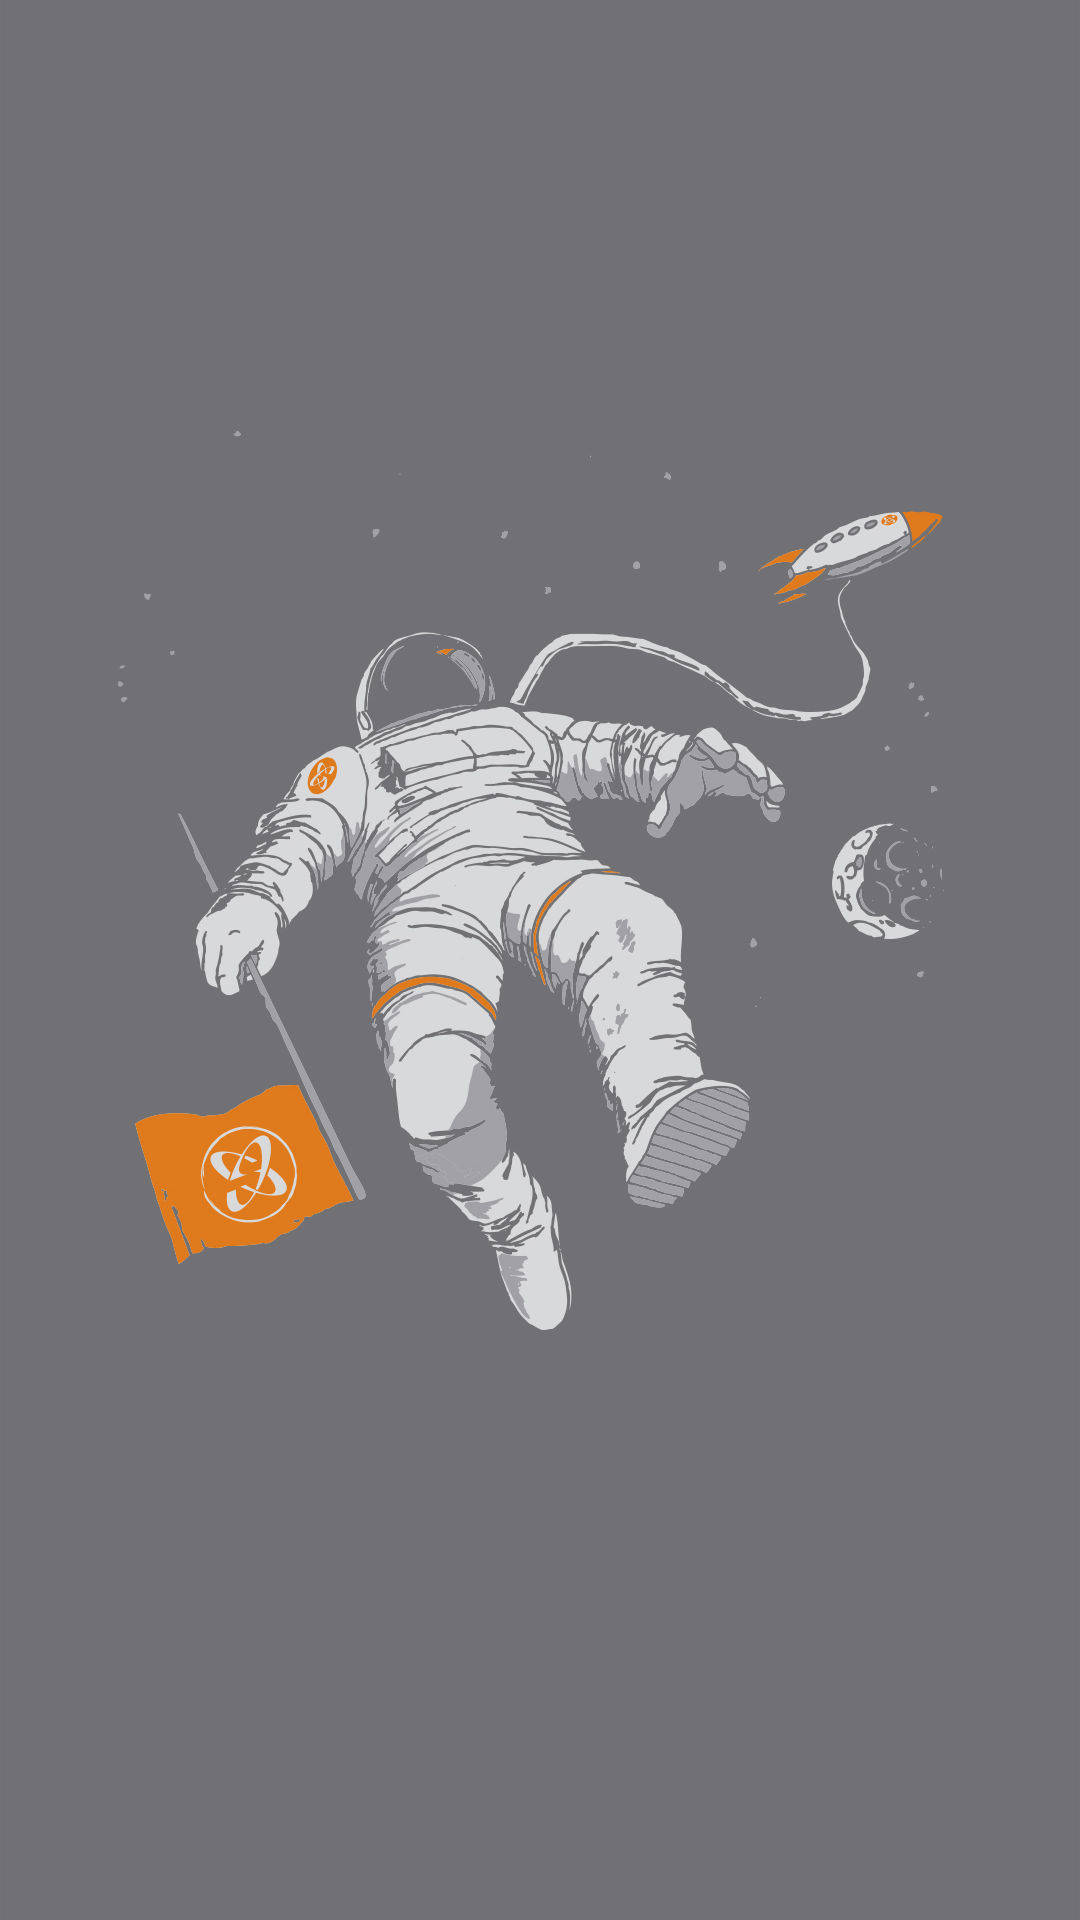 1080X1920 Astronaut Wallpaper and Background